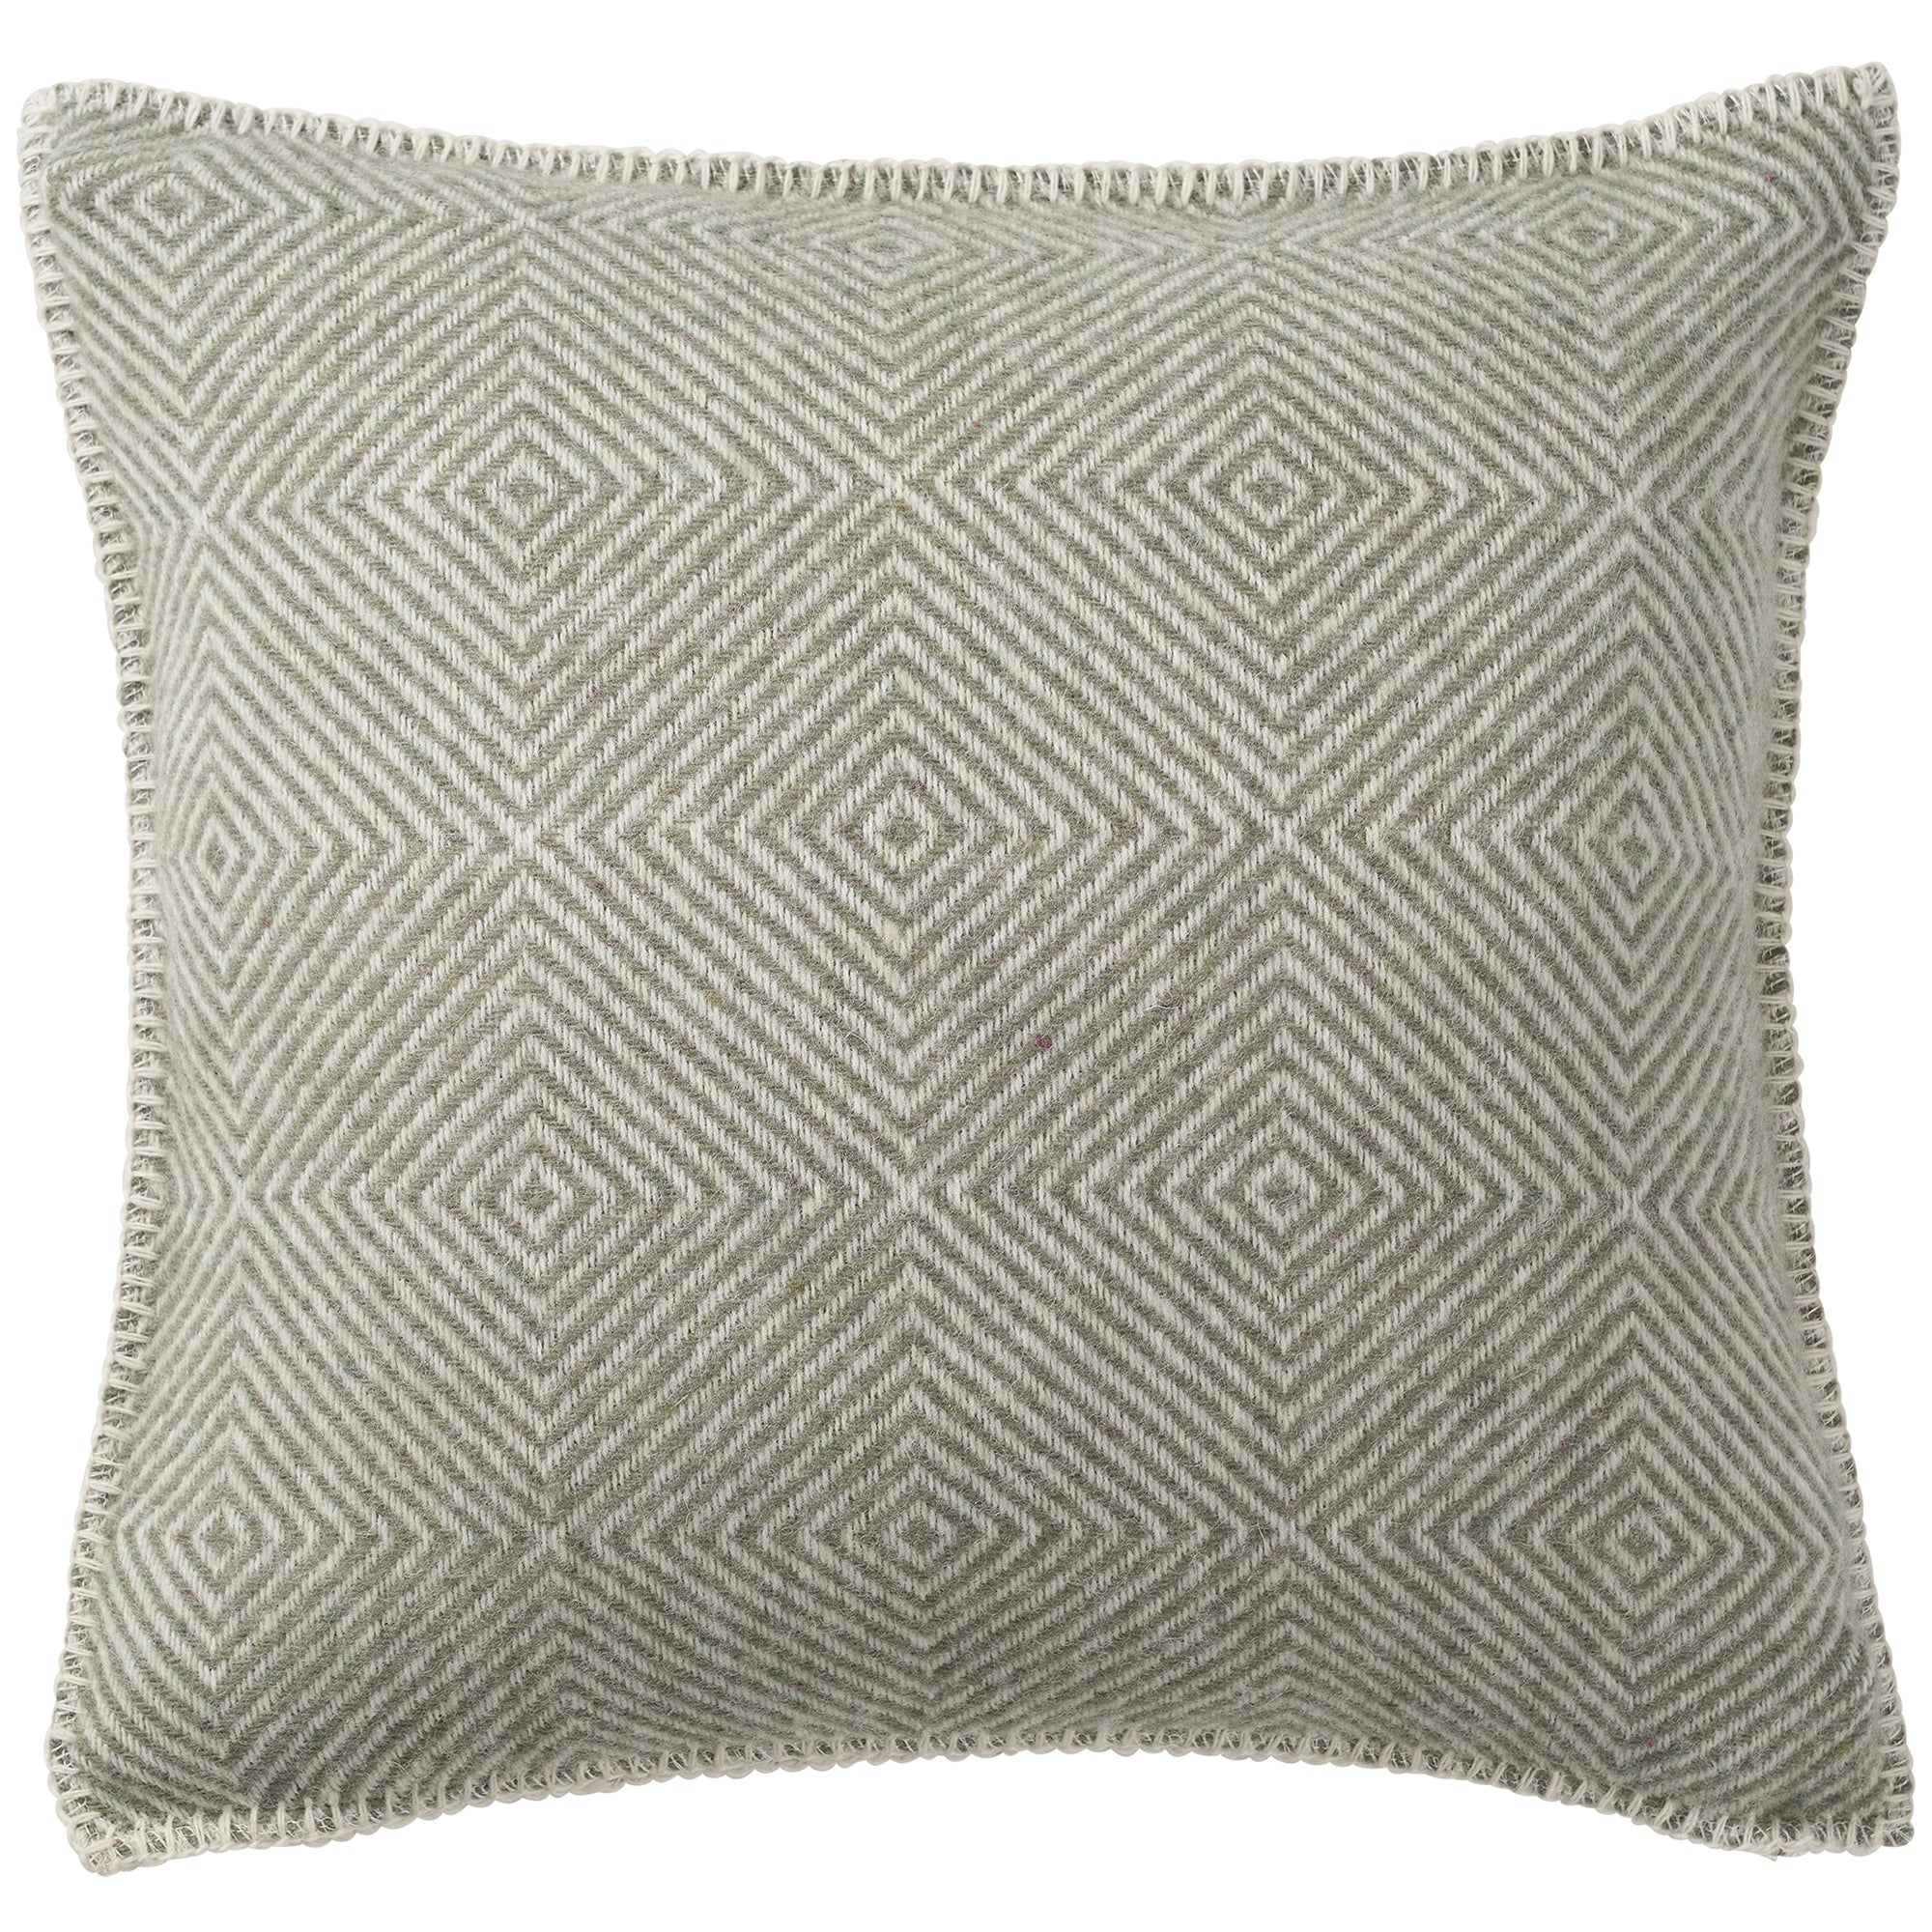 Gooseye Green 45x45cm Recycled Wool Cushion Cover